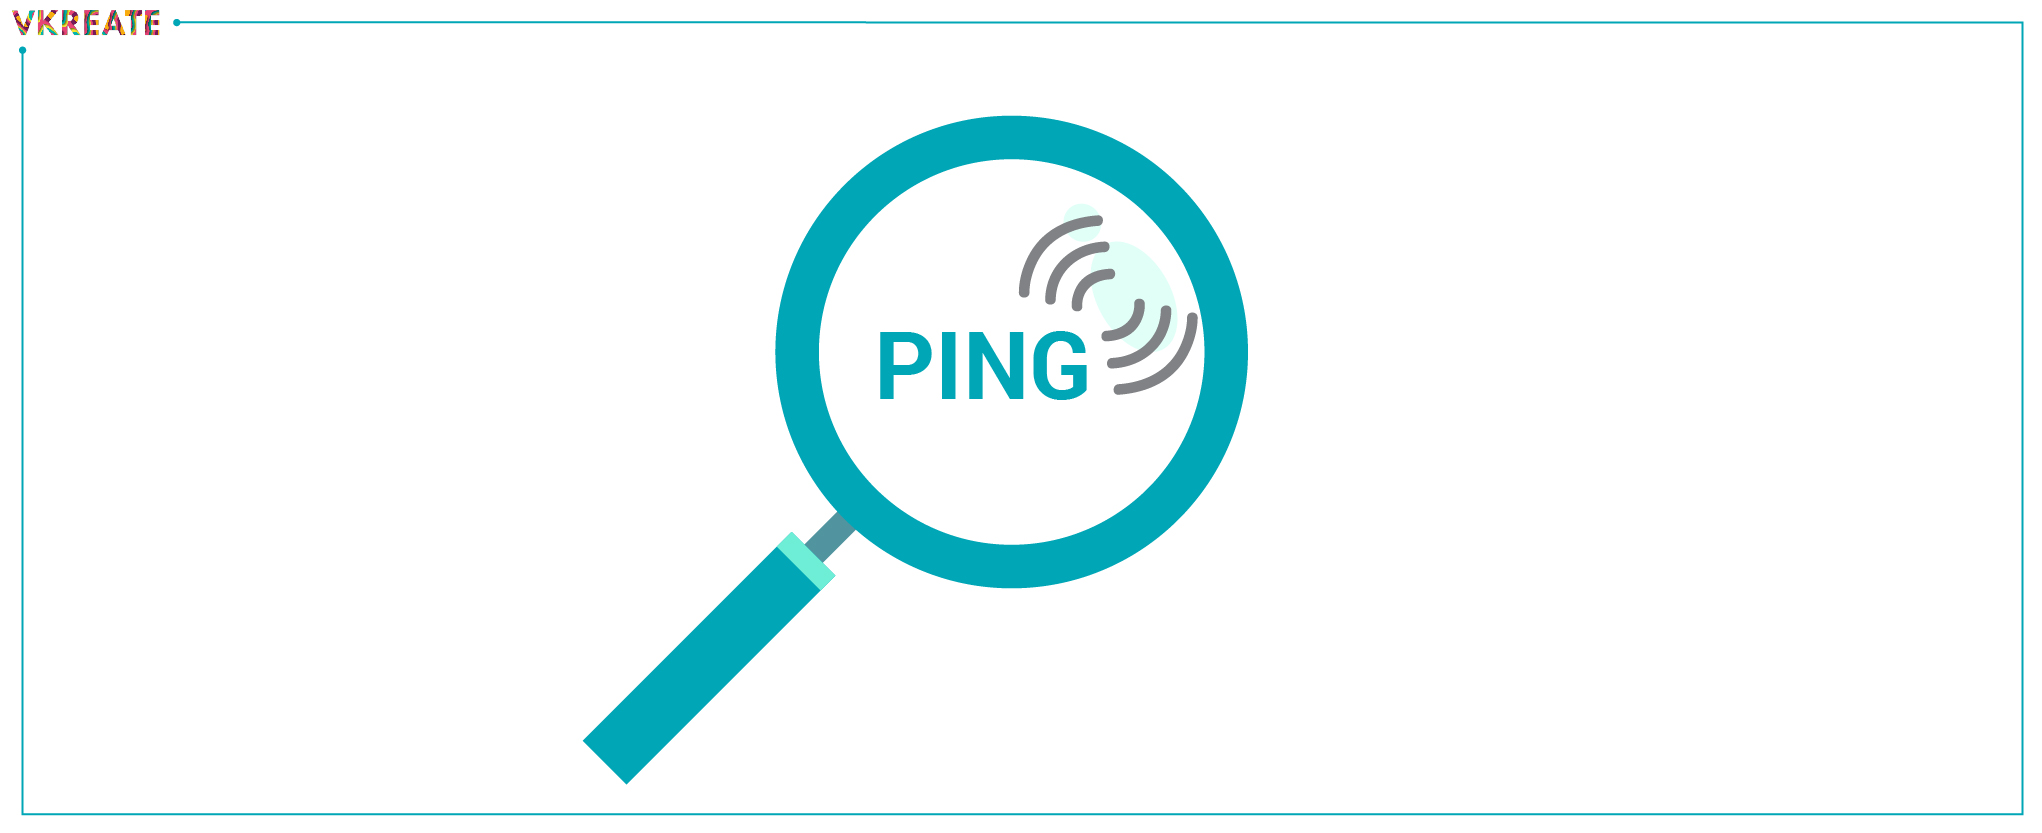 Ping submission sites list 2020 | Indexing Backlinks & Post Quickly